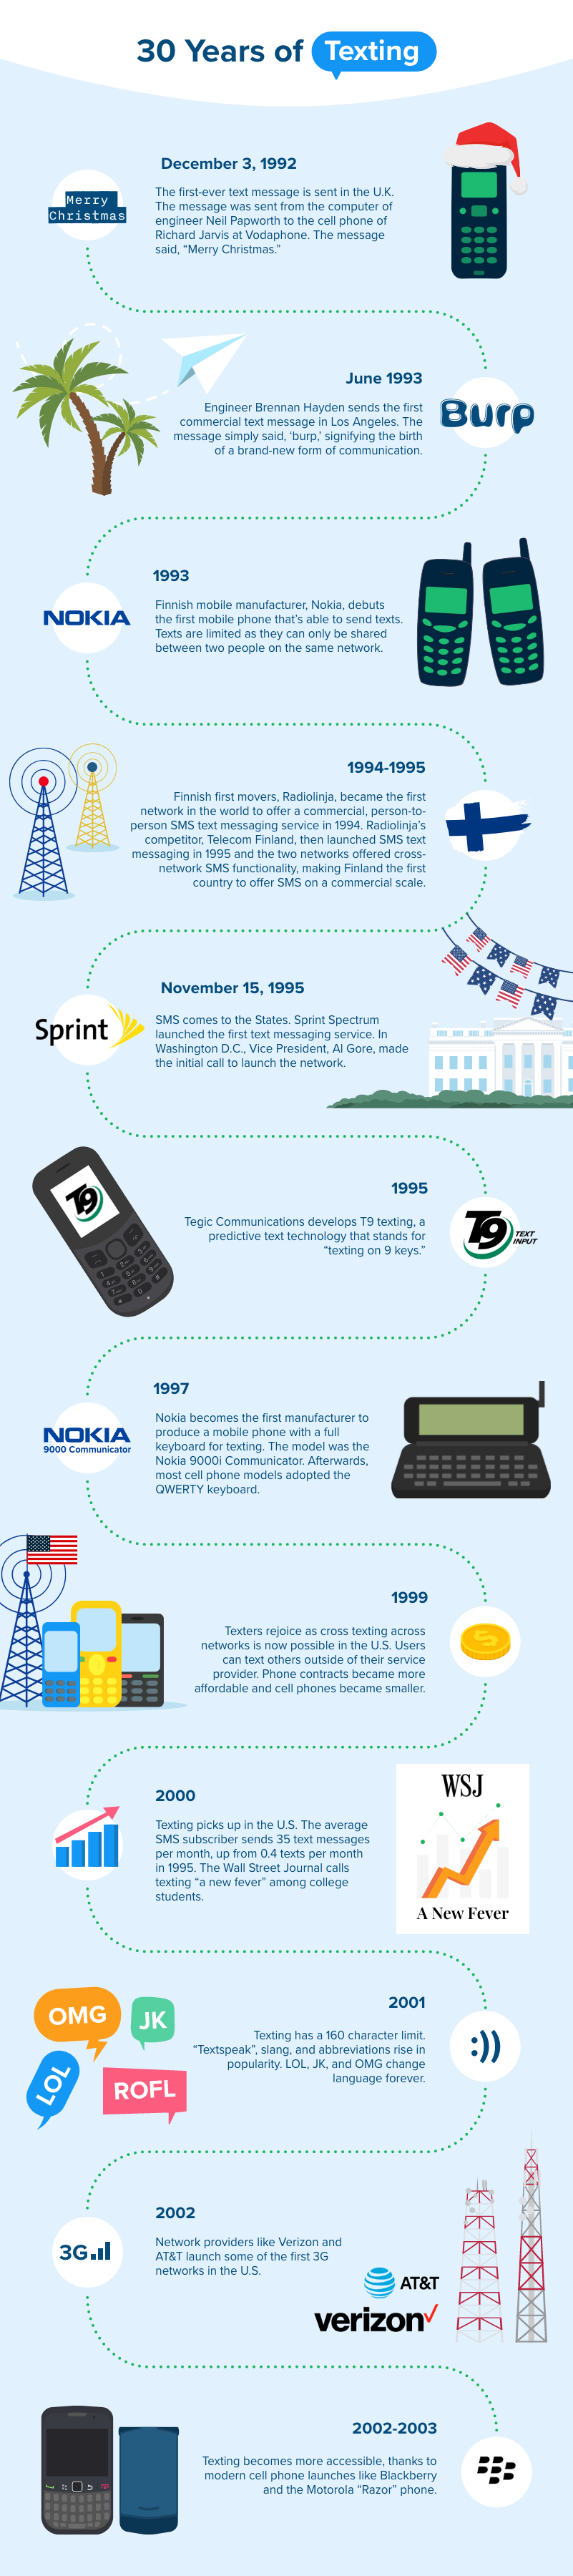 Alt: a timeline infographic showing the history of texting from 1992 to 2003